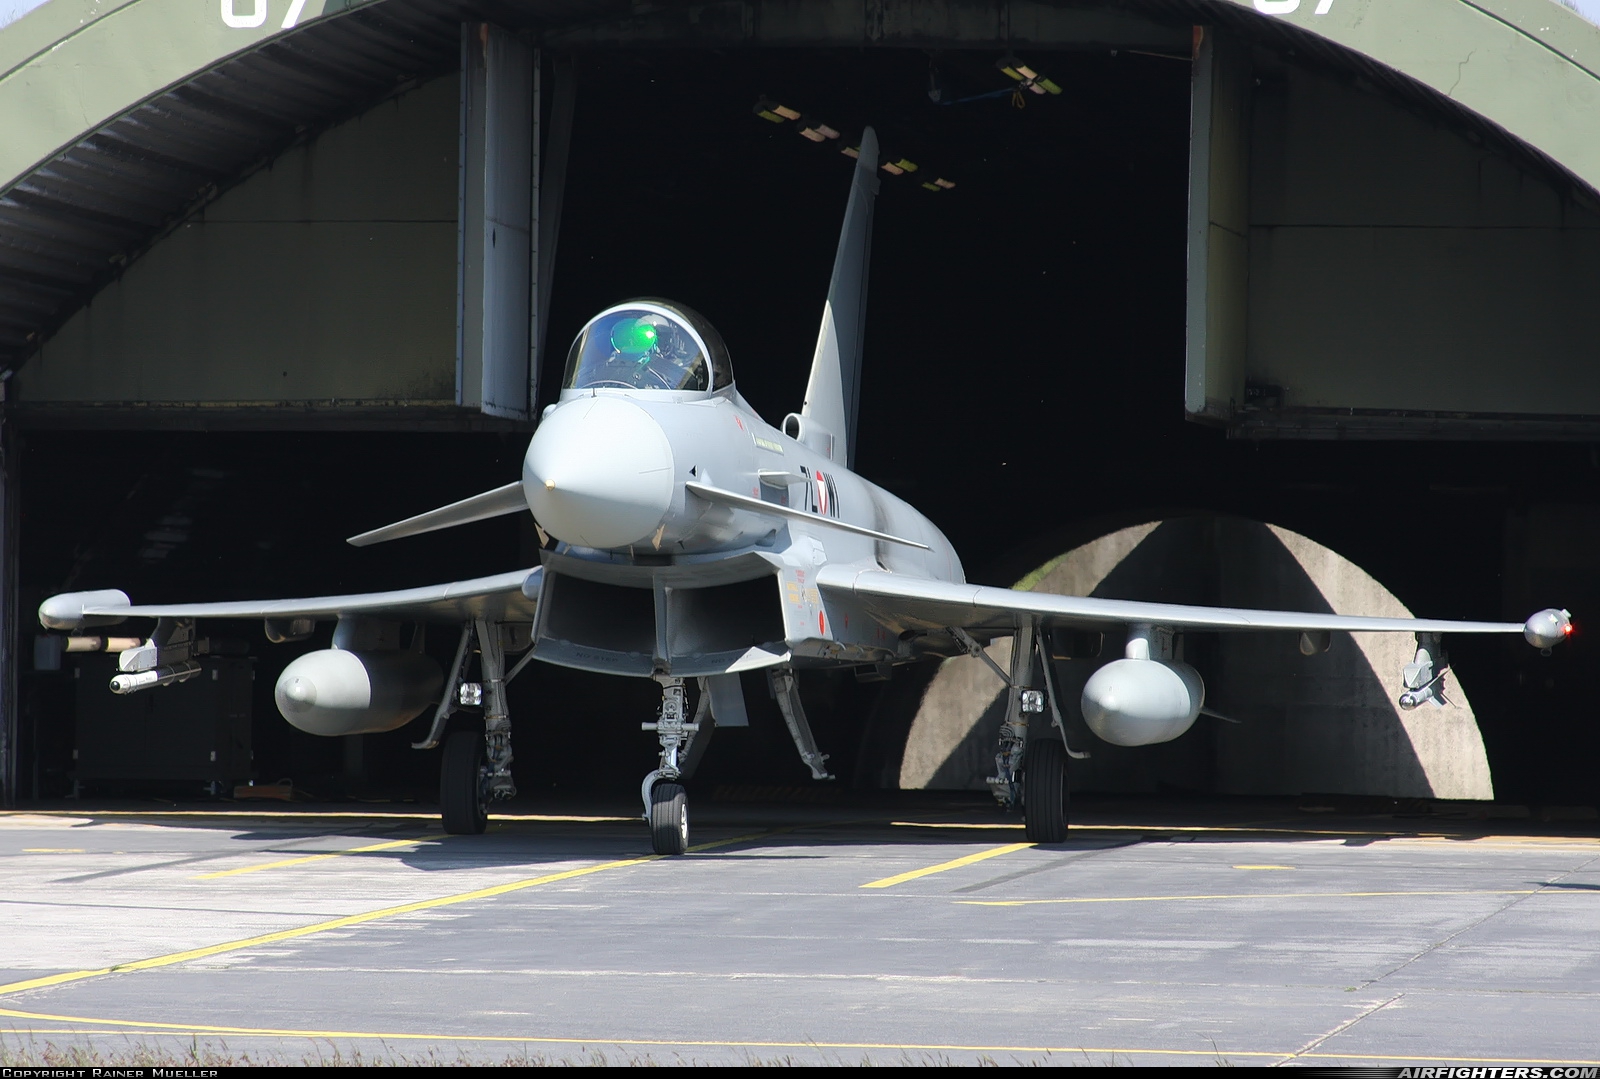 Austria - Air Force Eurofighter EF-2000 Typhoon S 7L-WI at Wittmundhafen (Wittmund) (ETNT), Germany